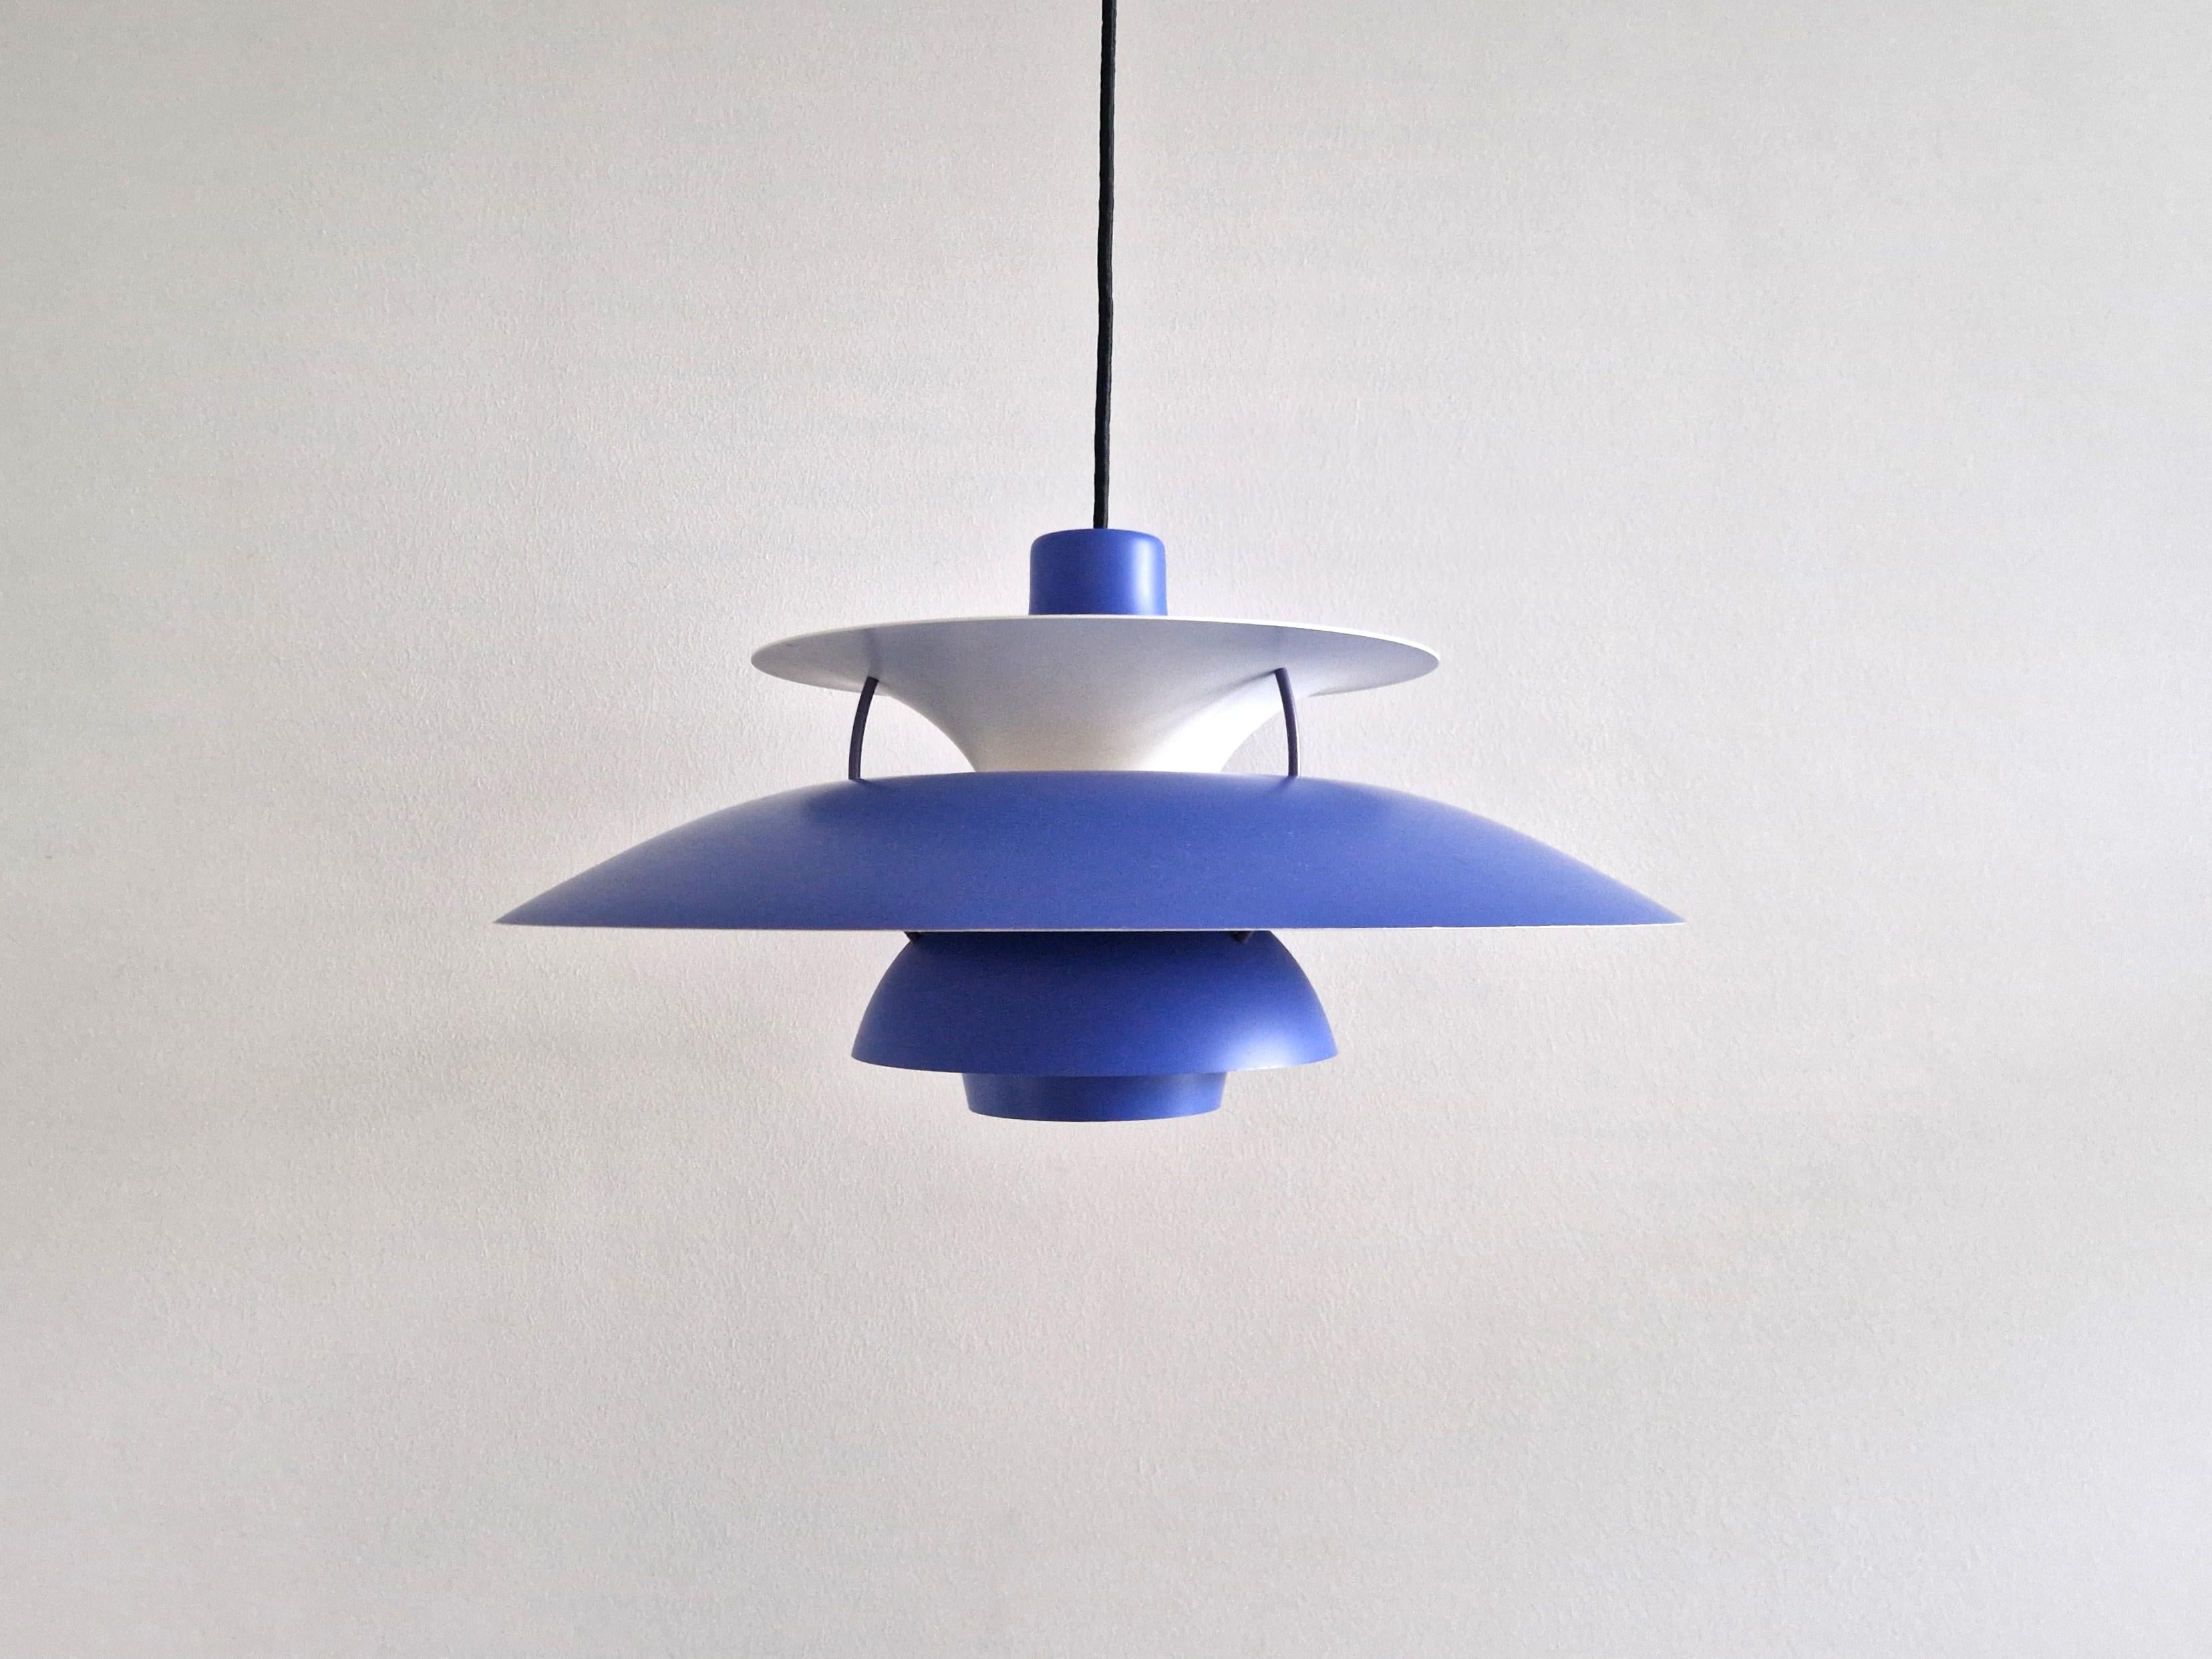 The timeless model PH5 pendant lamp was designed by Poul Henningsen for Louis Poulsen in 1956. This lamp has a blue purple shade with a red circle plate for the socket and top shade. The label show that this specific light is of later production